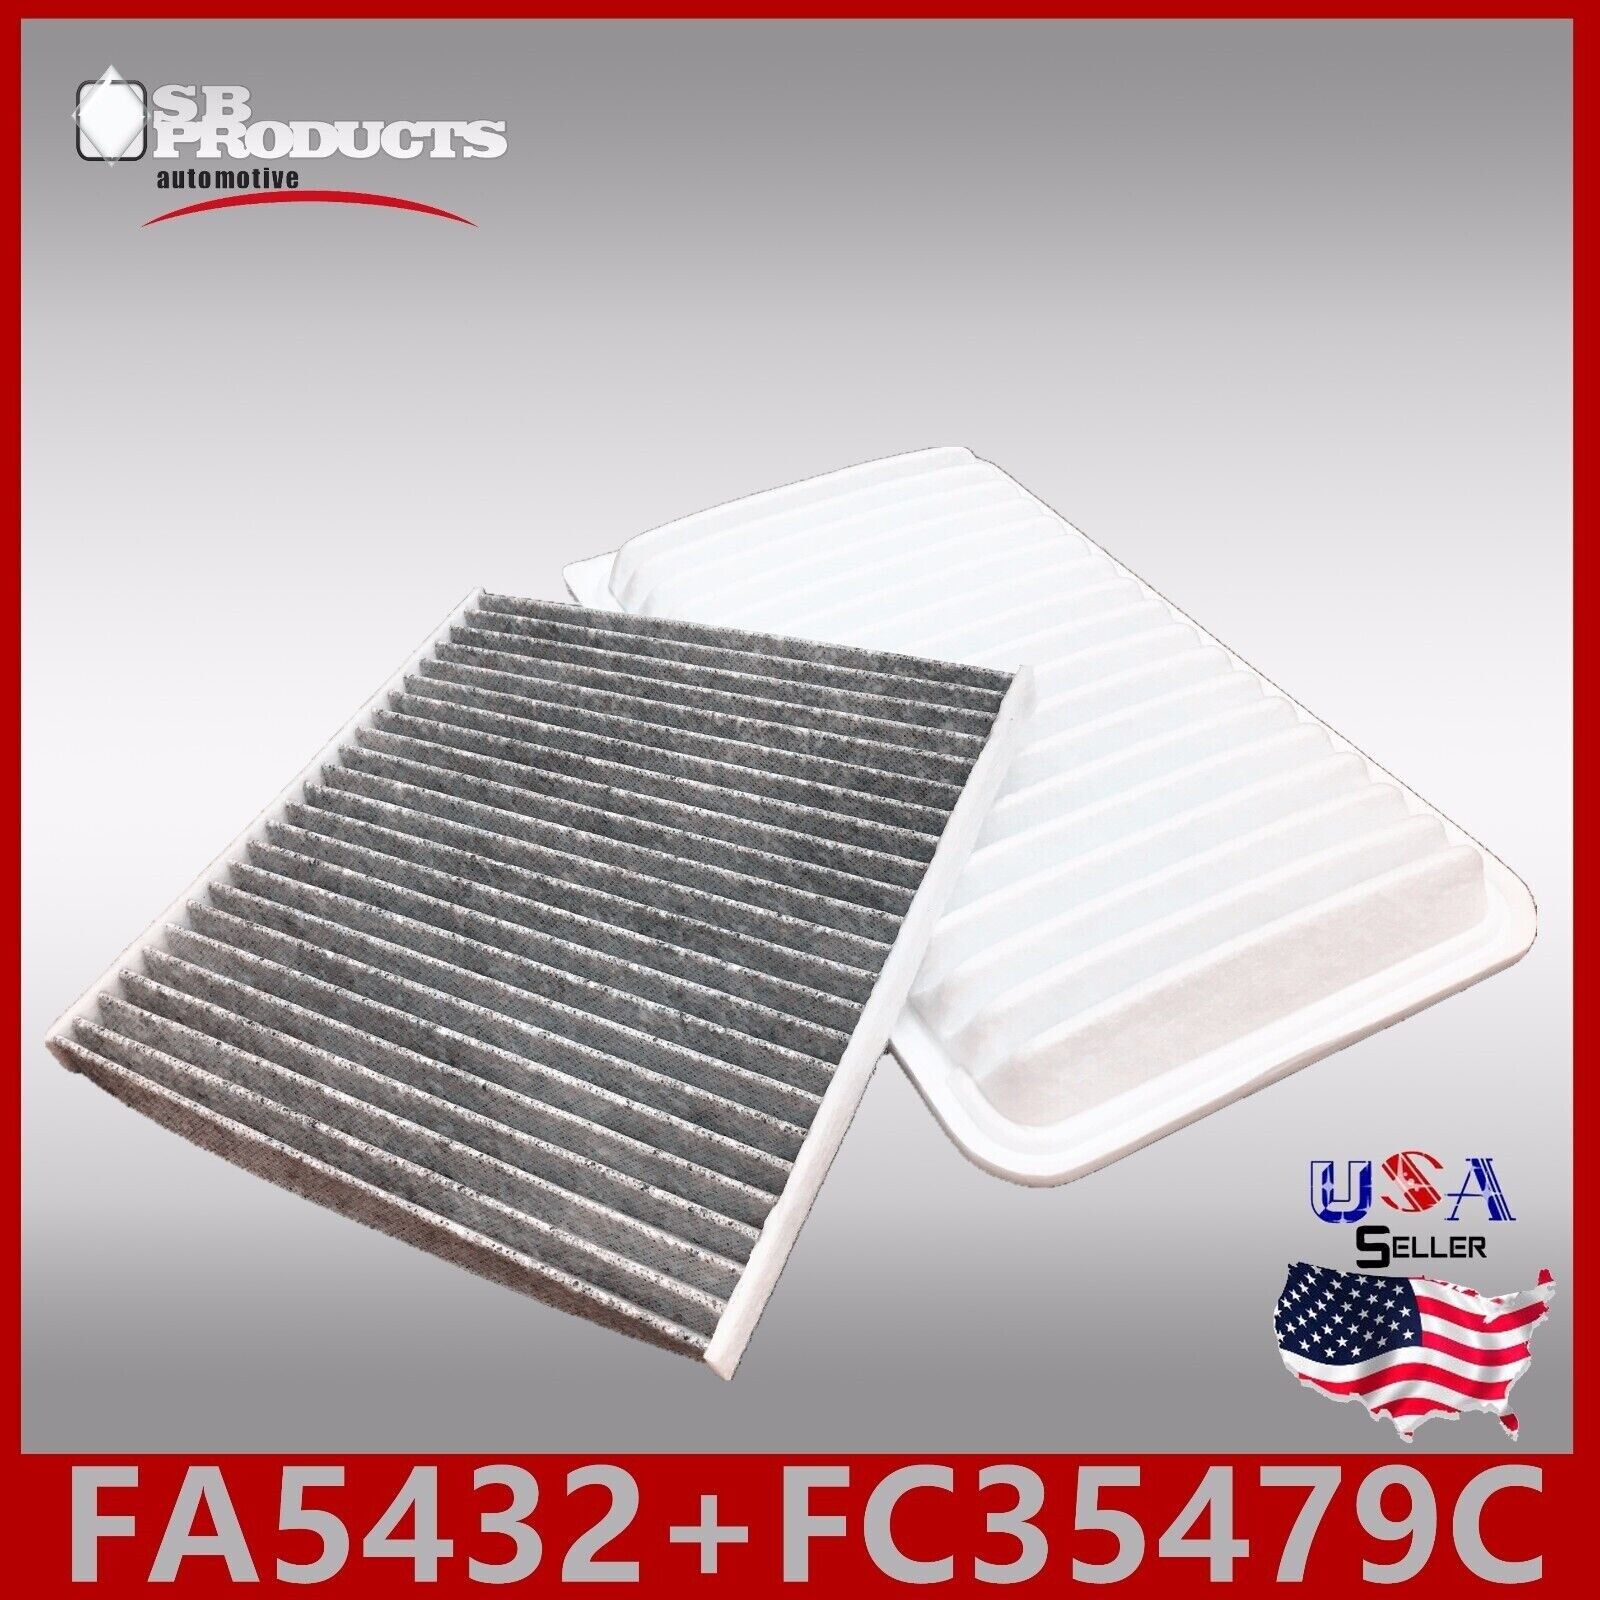 Auto1tech Engine and Cabin air filter Combo ~ Fits 2004-2006 ES330 & RX330